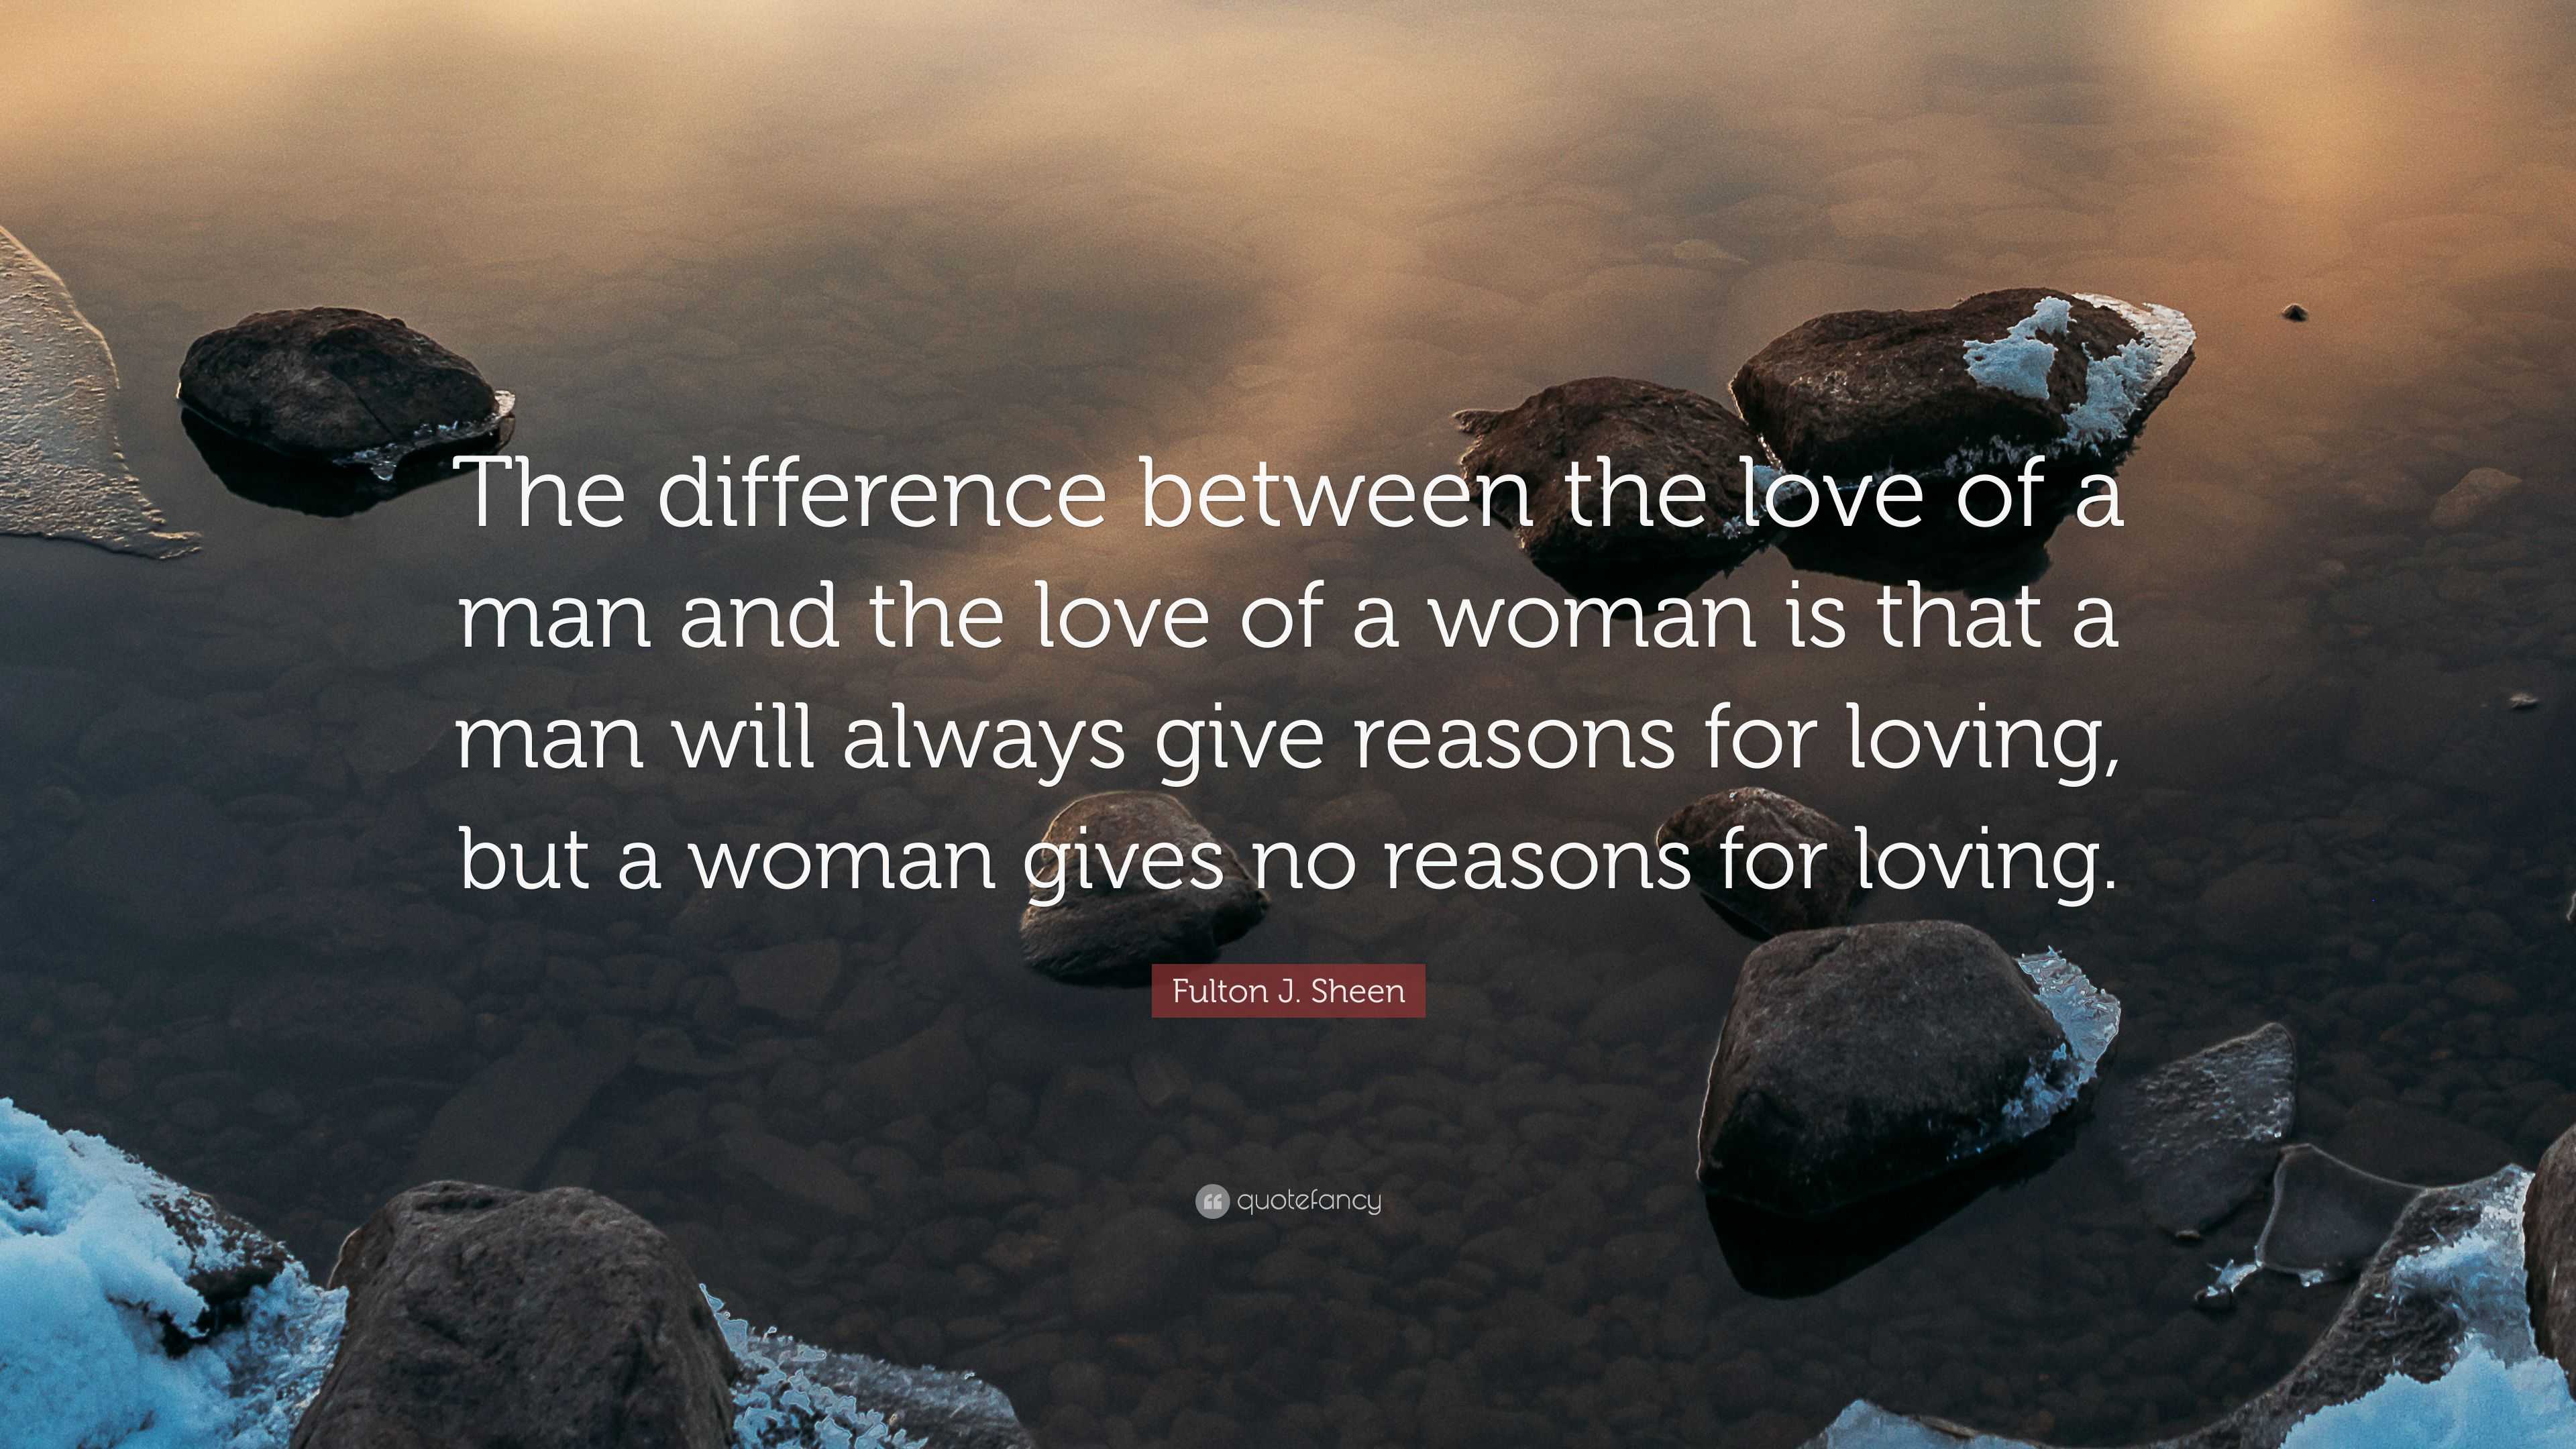 Fulton J. Sheen Quote: “The difference between the love of a man and ...